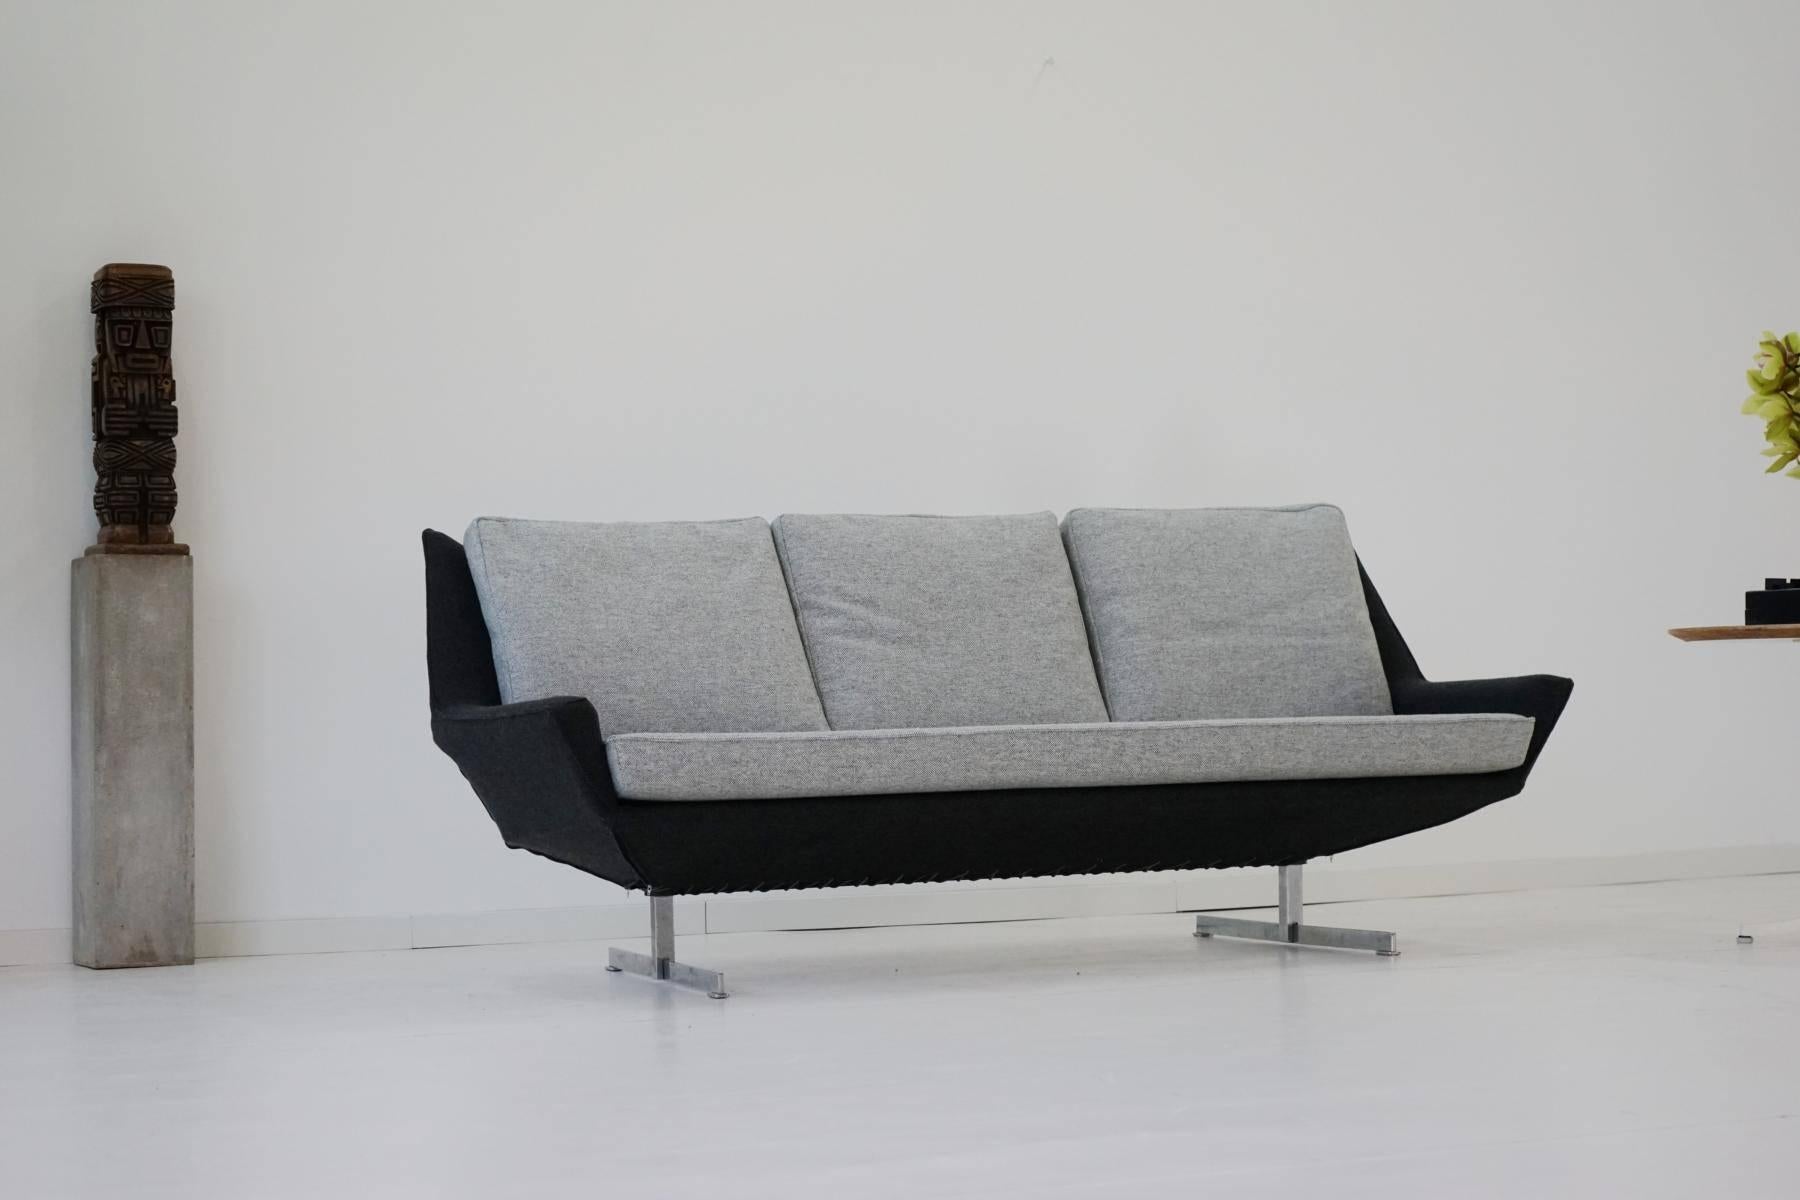 1950s three-seat sofa by Knoll midcentury Hallingdal 
Sofa by Knoll, very early and rare. Professionally restored. Produced in the 1950s respectively early 1960s. Very beautiful design. Professional new cover: The sofa has been fully-restored and